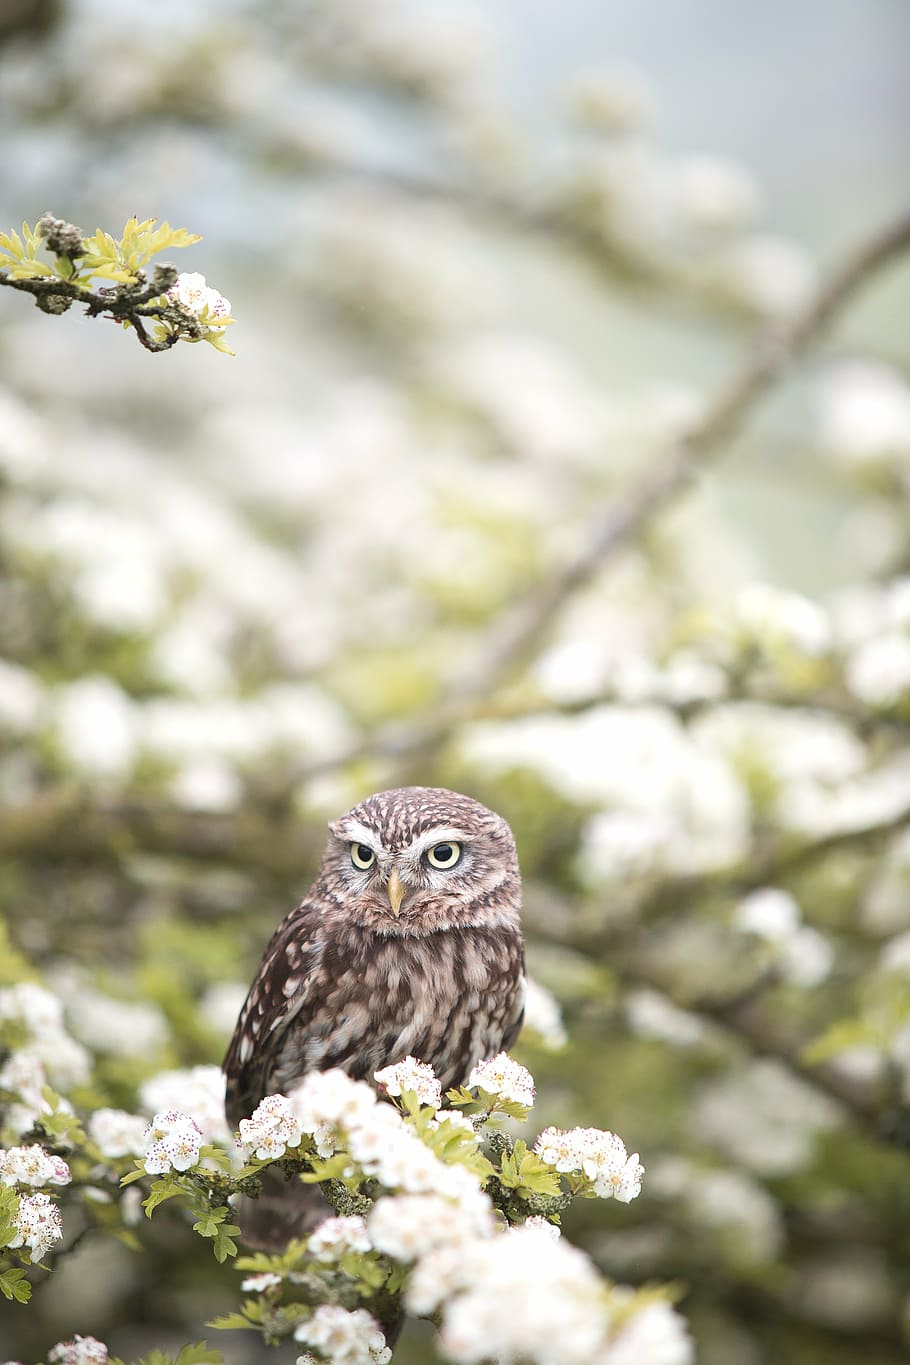 owl on green leafed plant with white flowers, animal, bird, macro